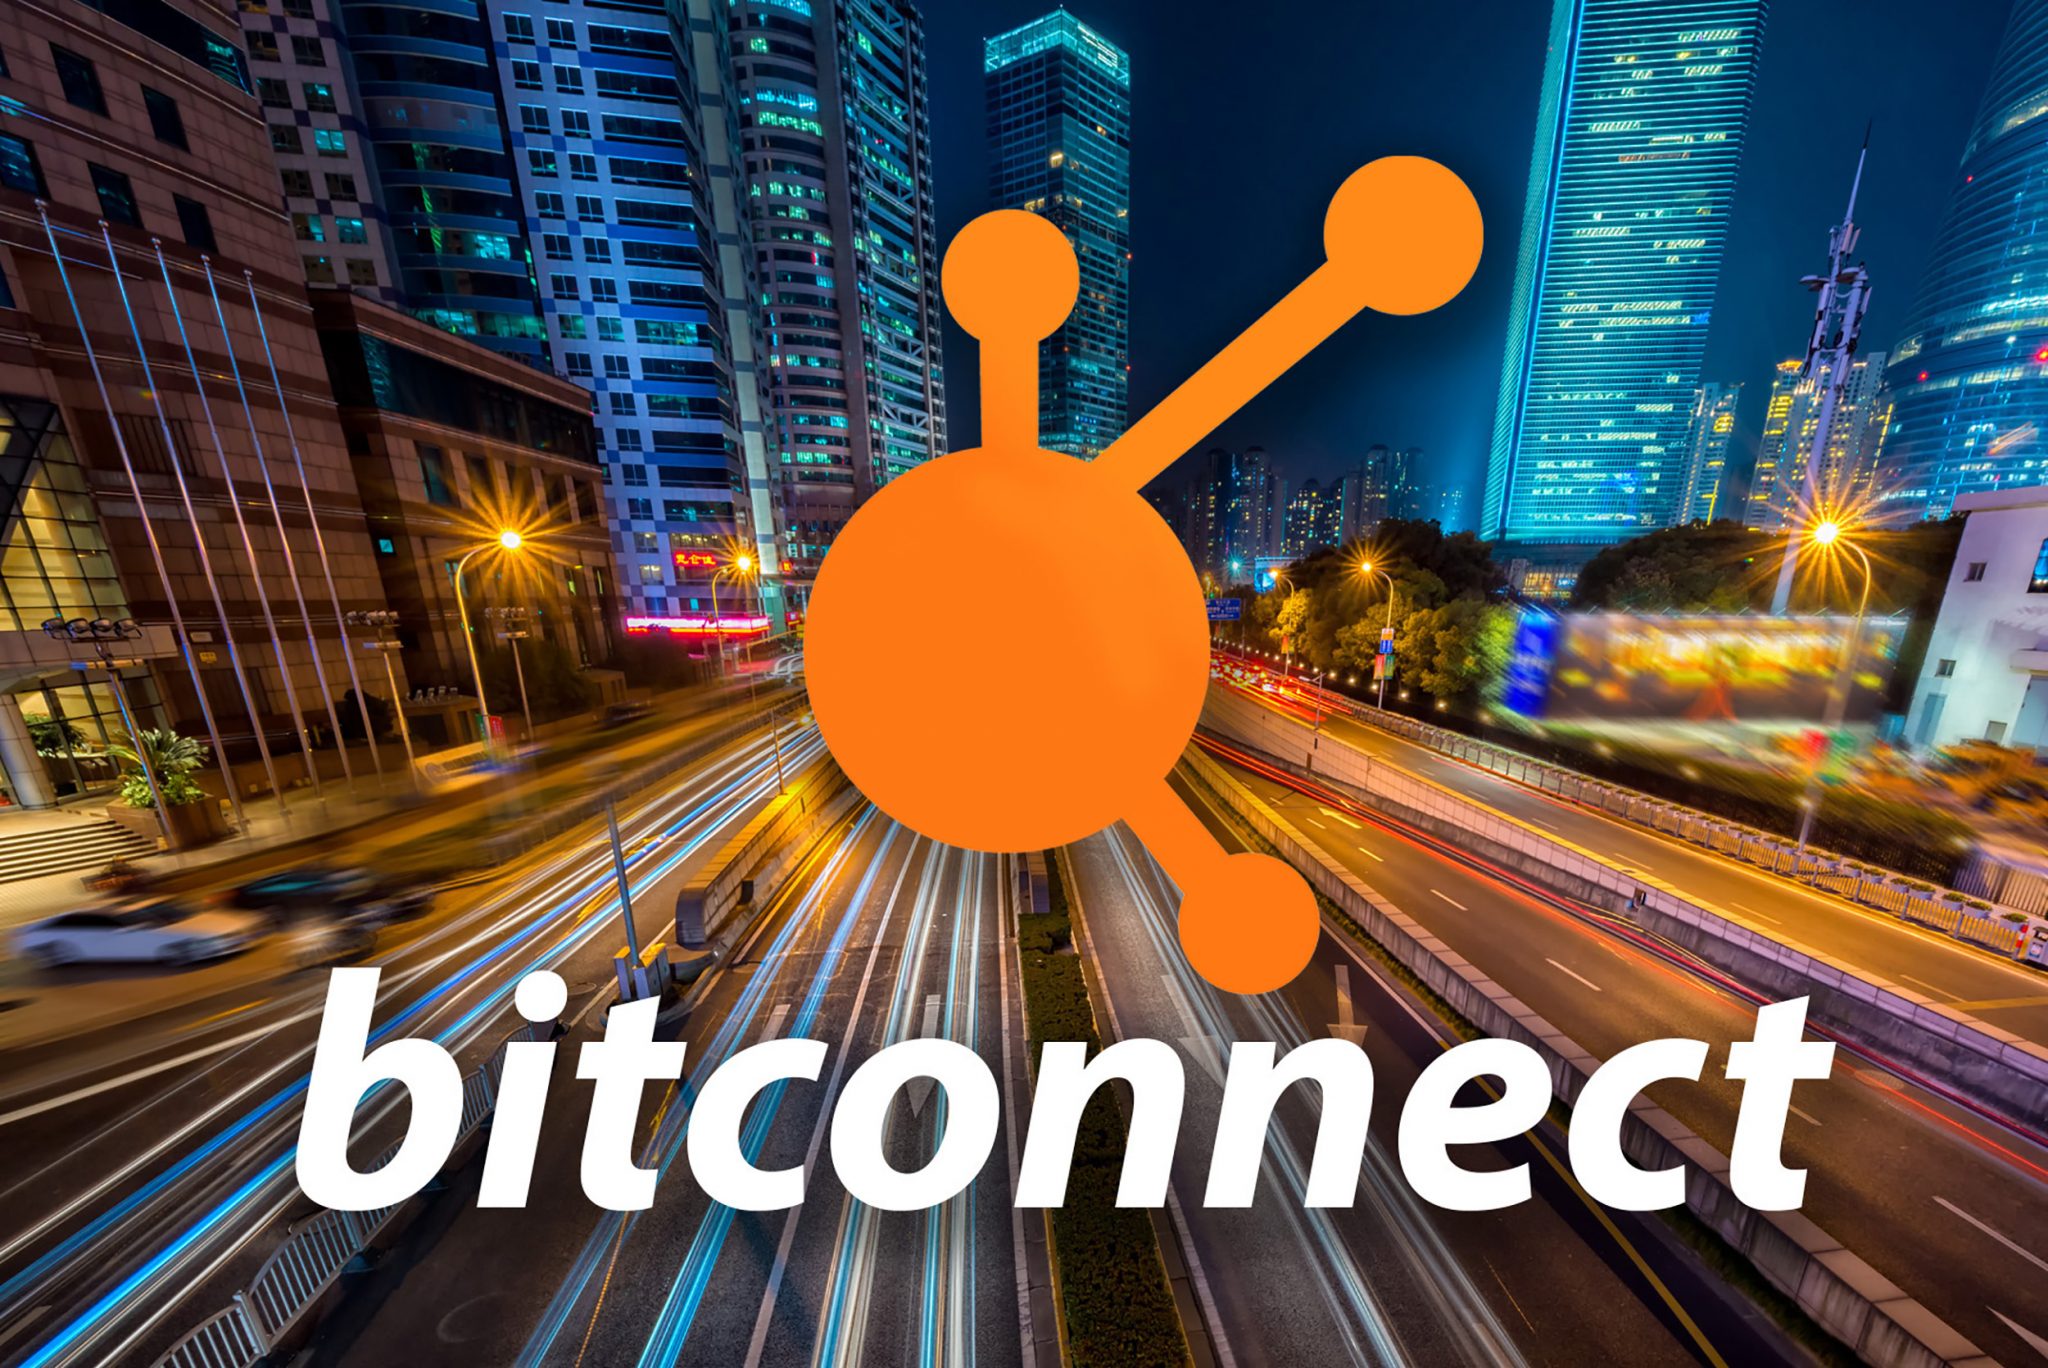 BitConnect founder must answer for the $2B Bitcoin (BTC) fraud